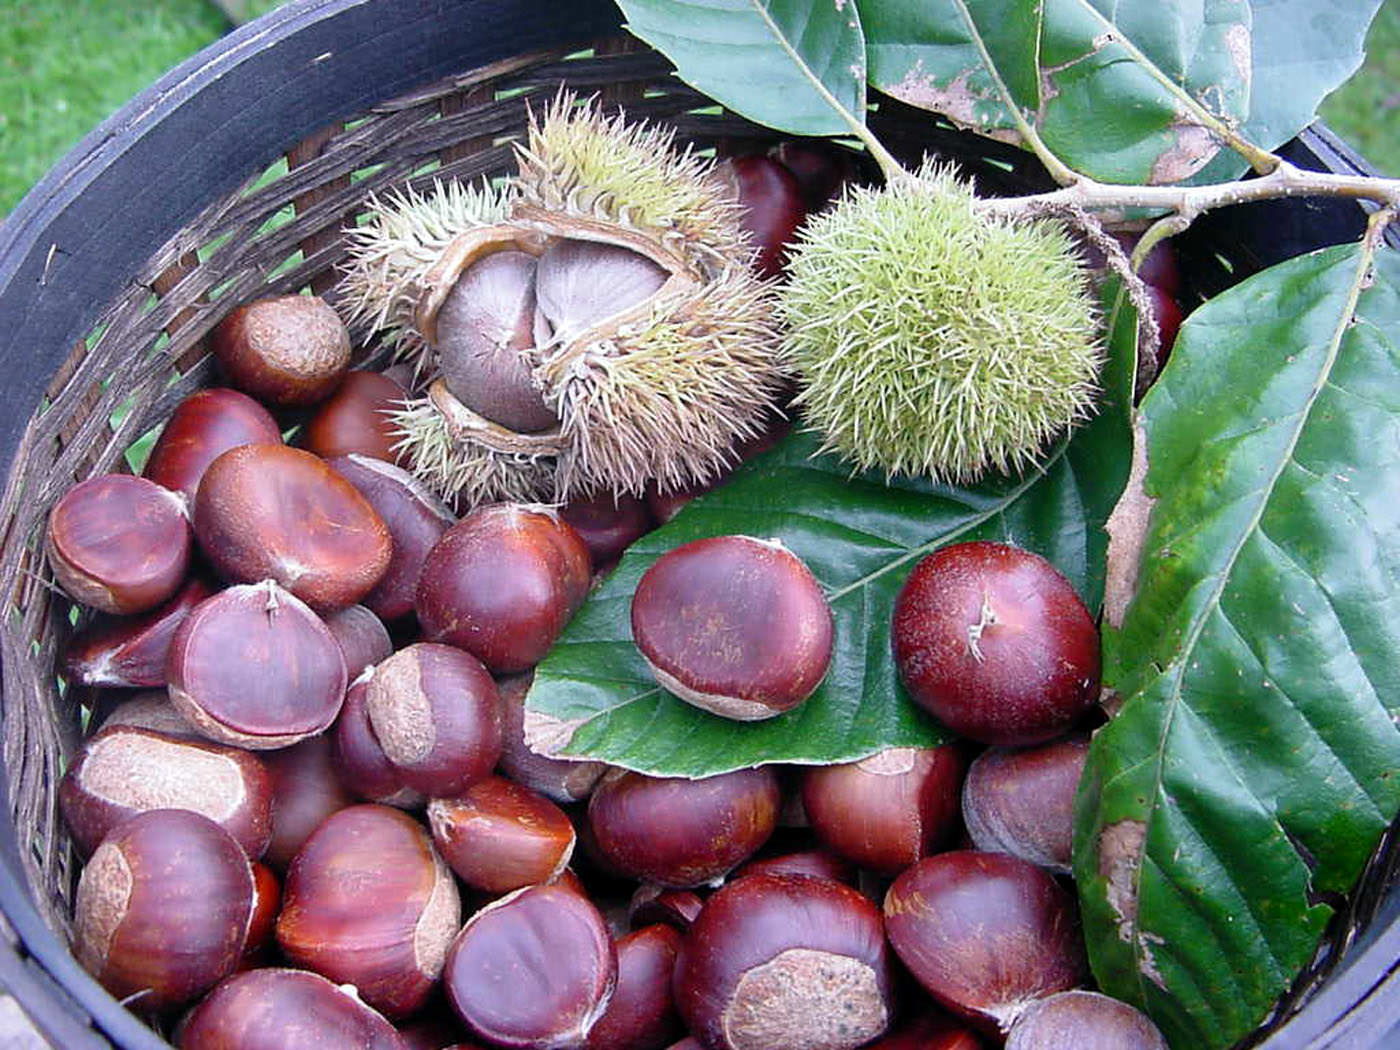 The new chestnut named after Dr Dunstan is a cross between American and Chinese chestnuts and has been blight free for over 30 years